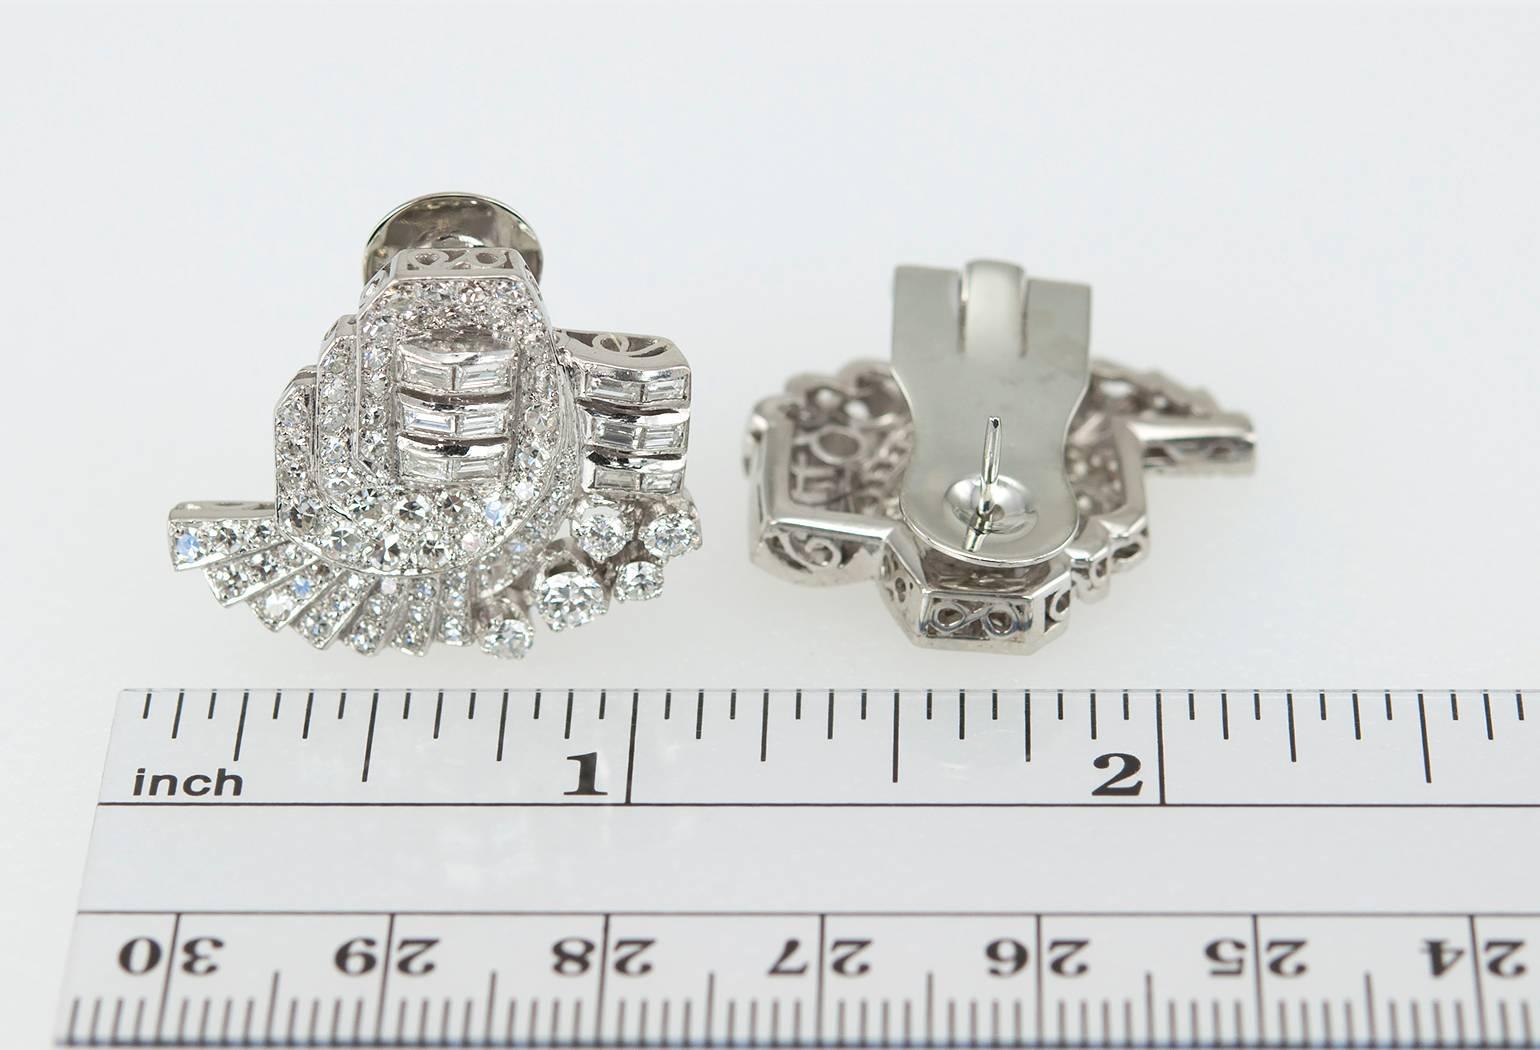 Gorgeous diamond fan-style drop earrings set in platinum with lever-backs.  These earrings really sparkle with round brilliant, single cut and baguette cut diamonds, approximately 4 carats in total diamond weight. Circa 1940s.